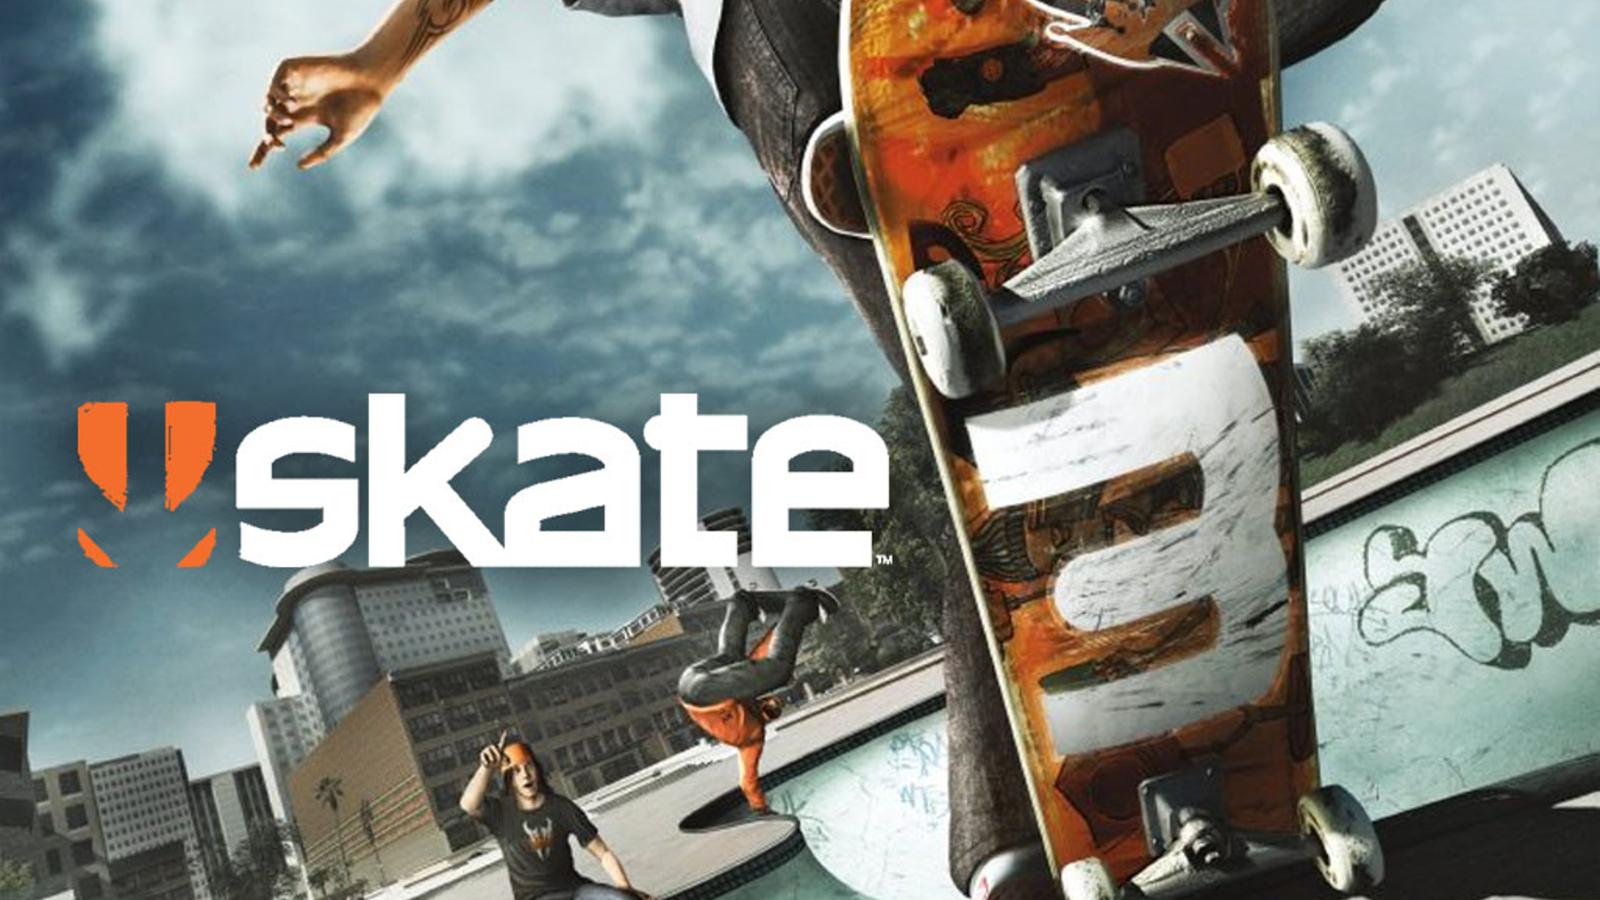 Retailer lists Skate 4 with exclusive extra on Xbox One